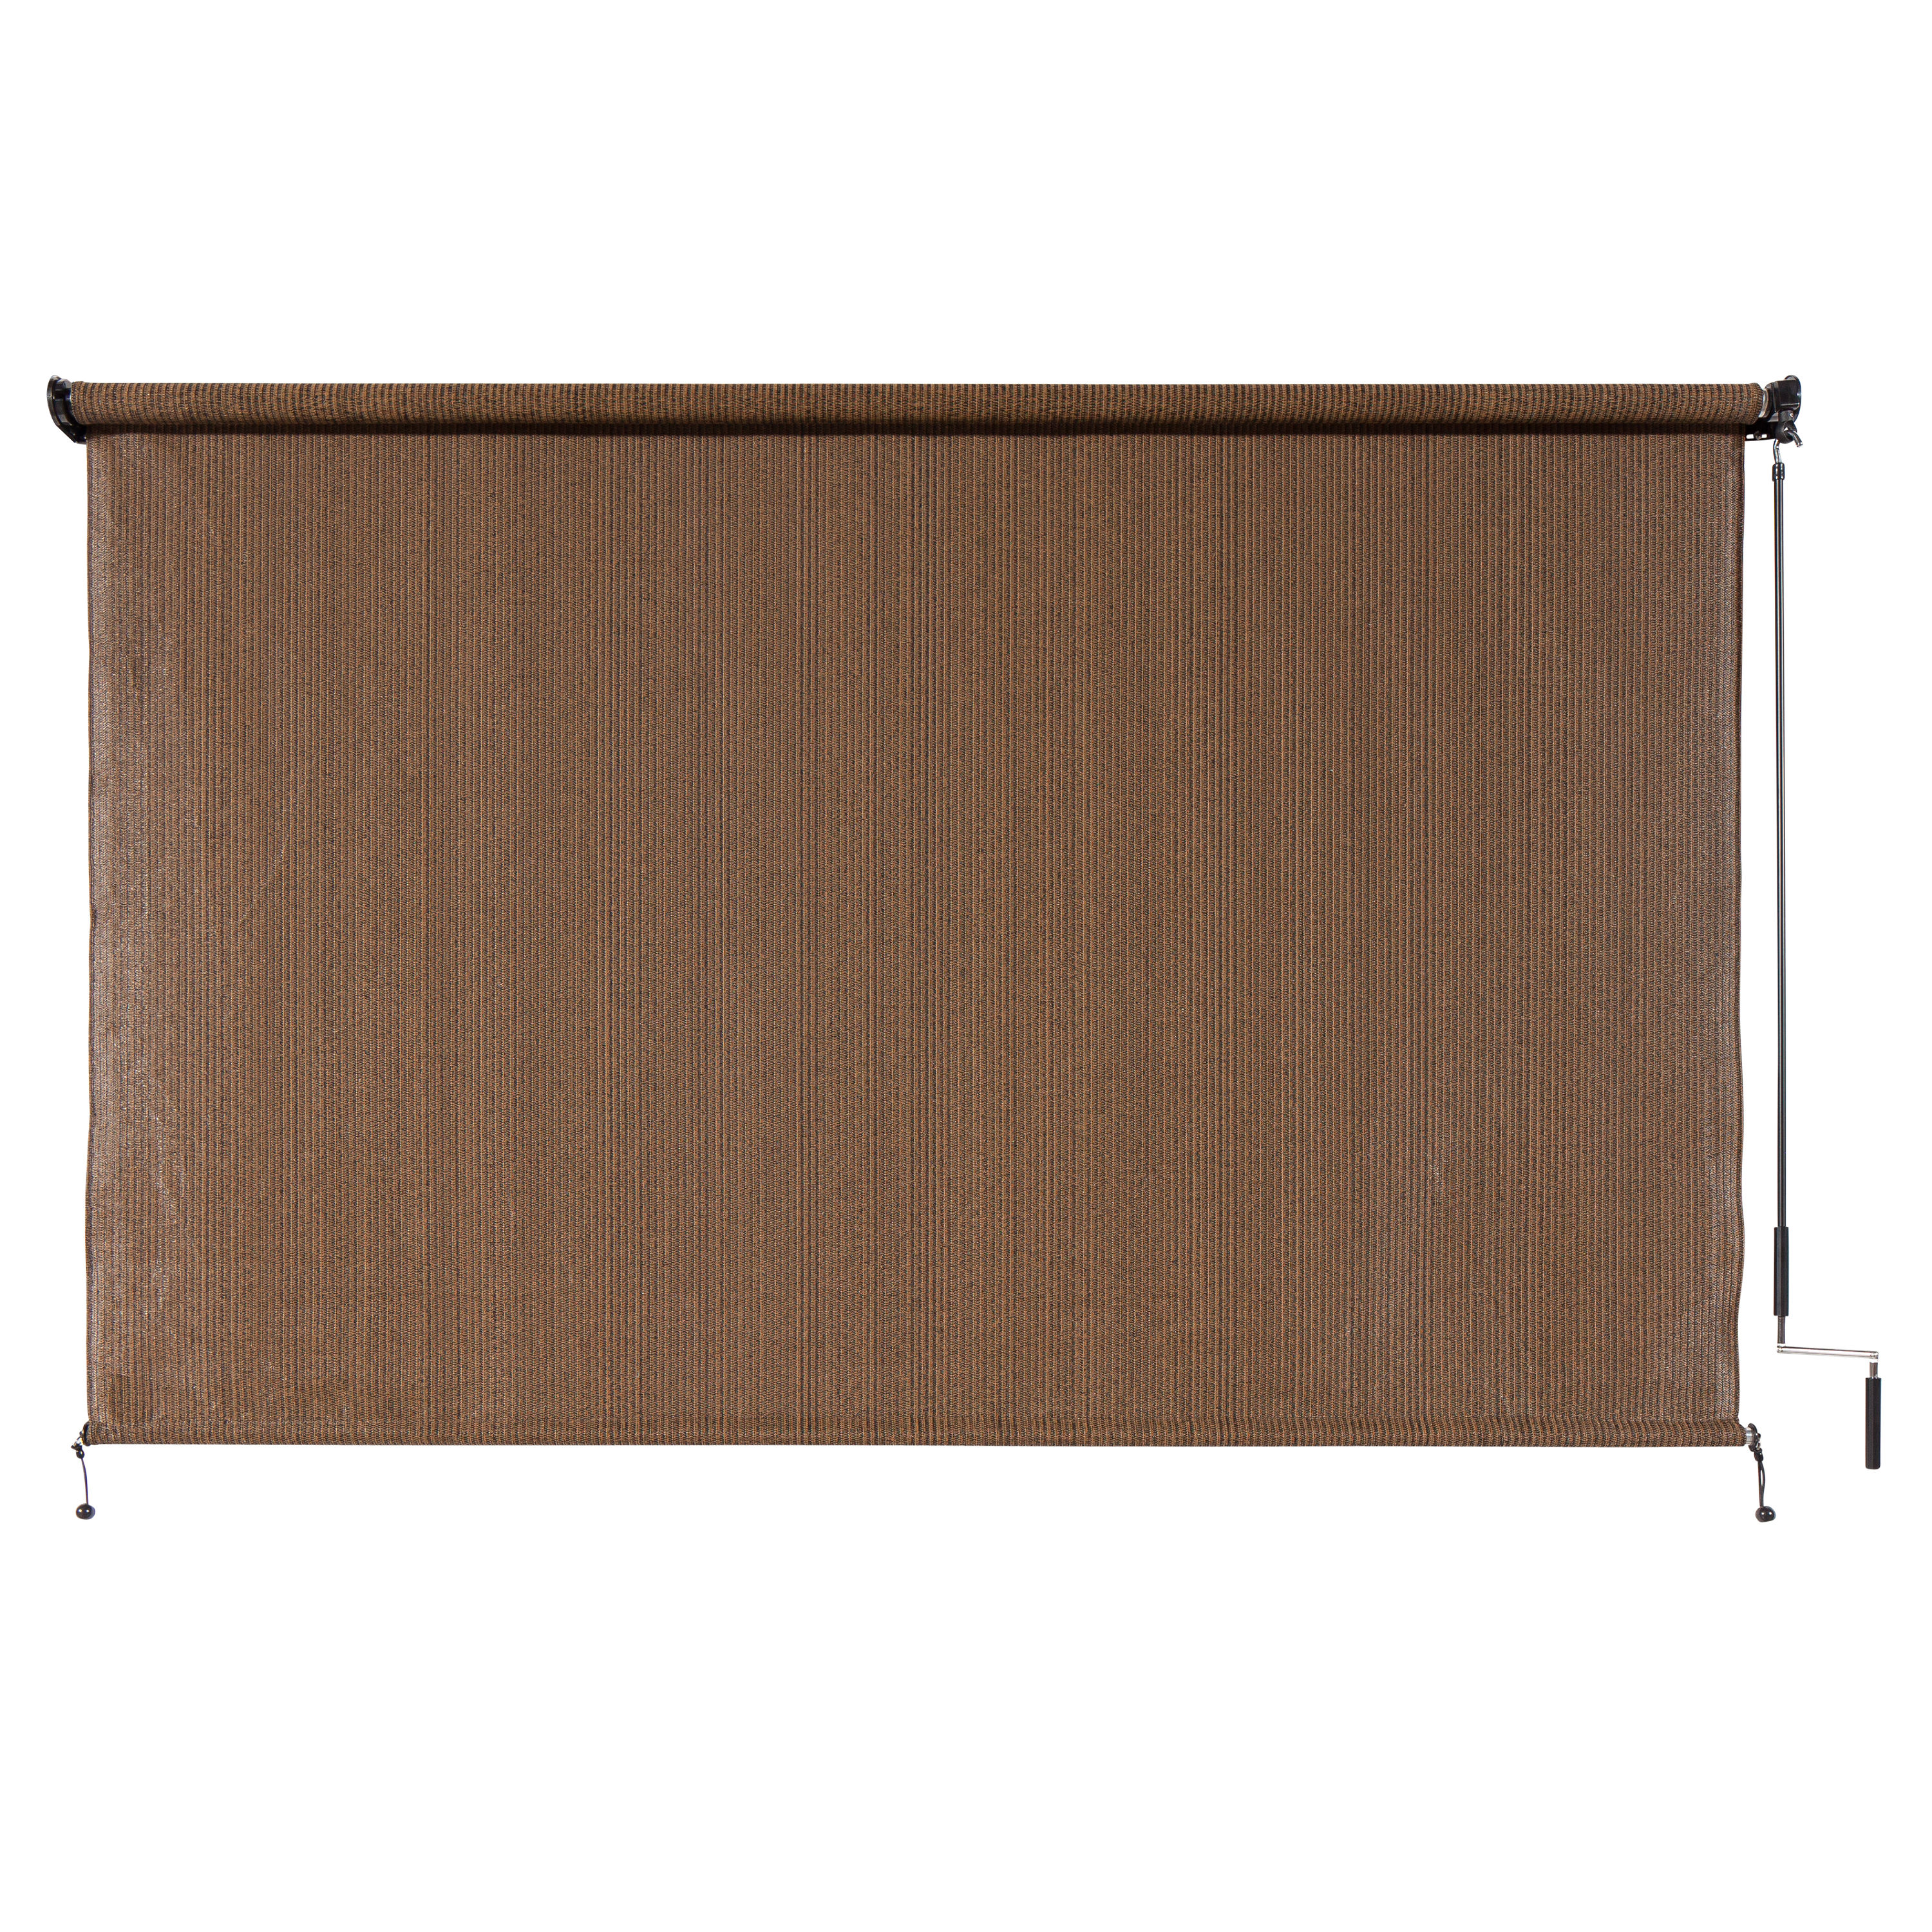 Southern Sunset No Valance, Coolaroo Exterior Roller Shade Cordless Roller Shade with 90% UV Protection 8 X 6 